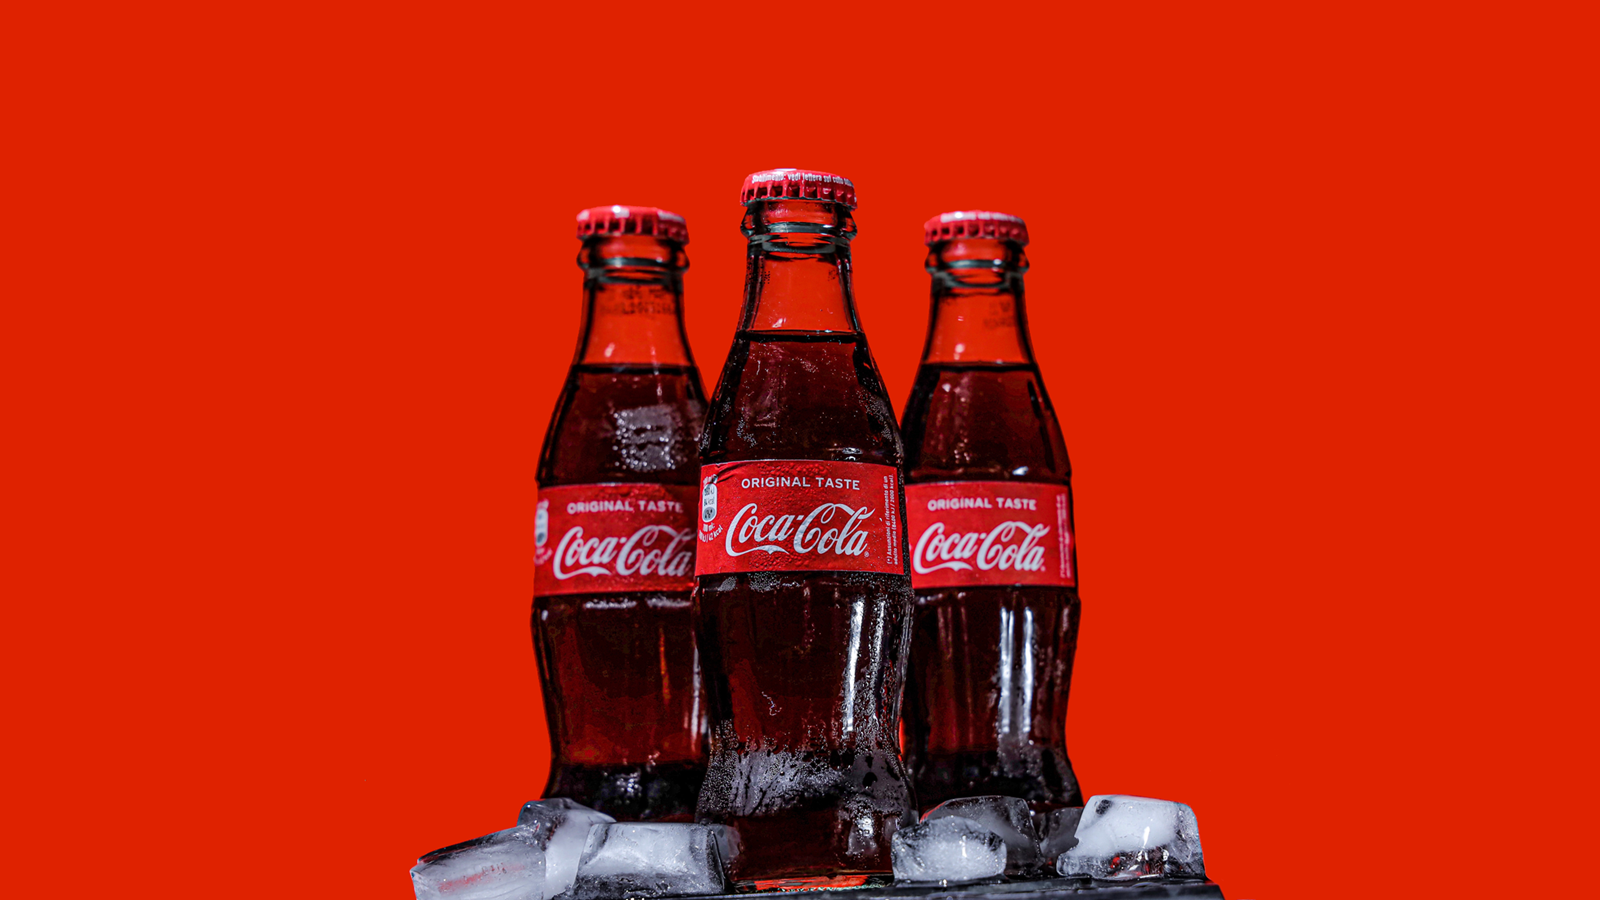 Coca-Cola investigates hacker group's claims of breach and data theft